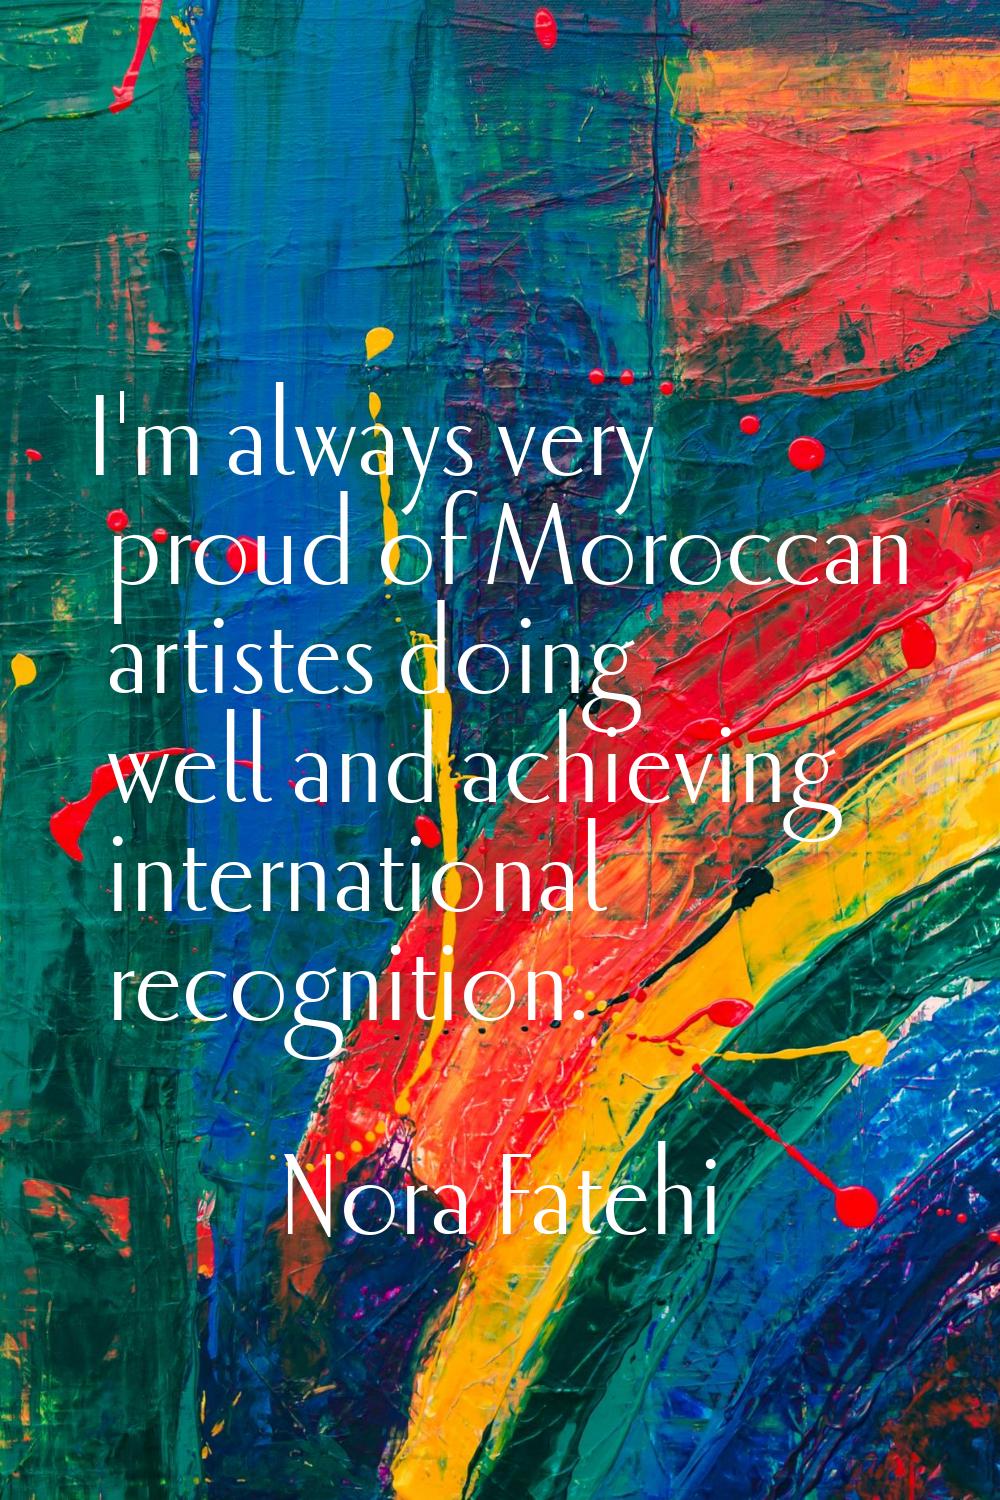 I'm always very proud of Moroccan artistes doing well and achieving international recognition.